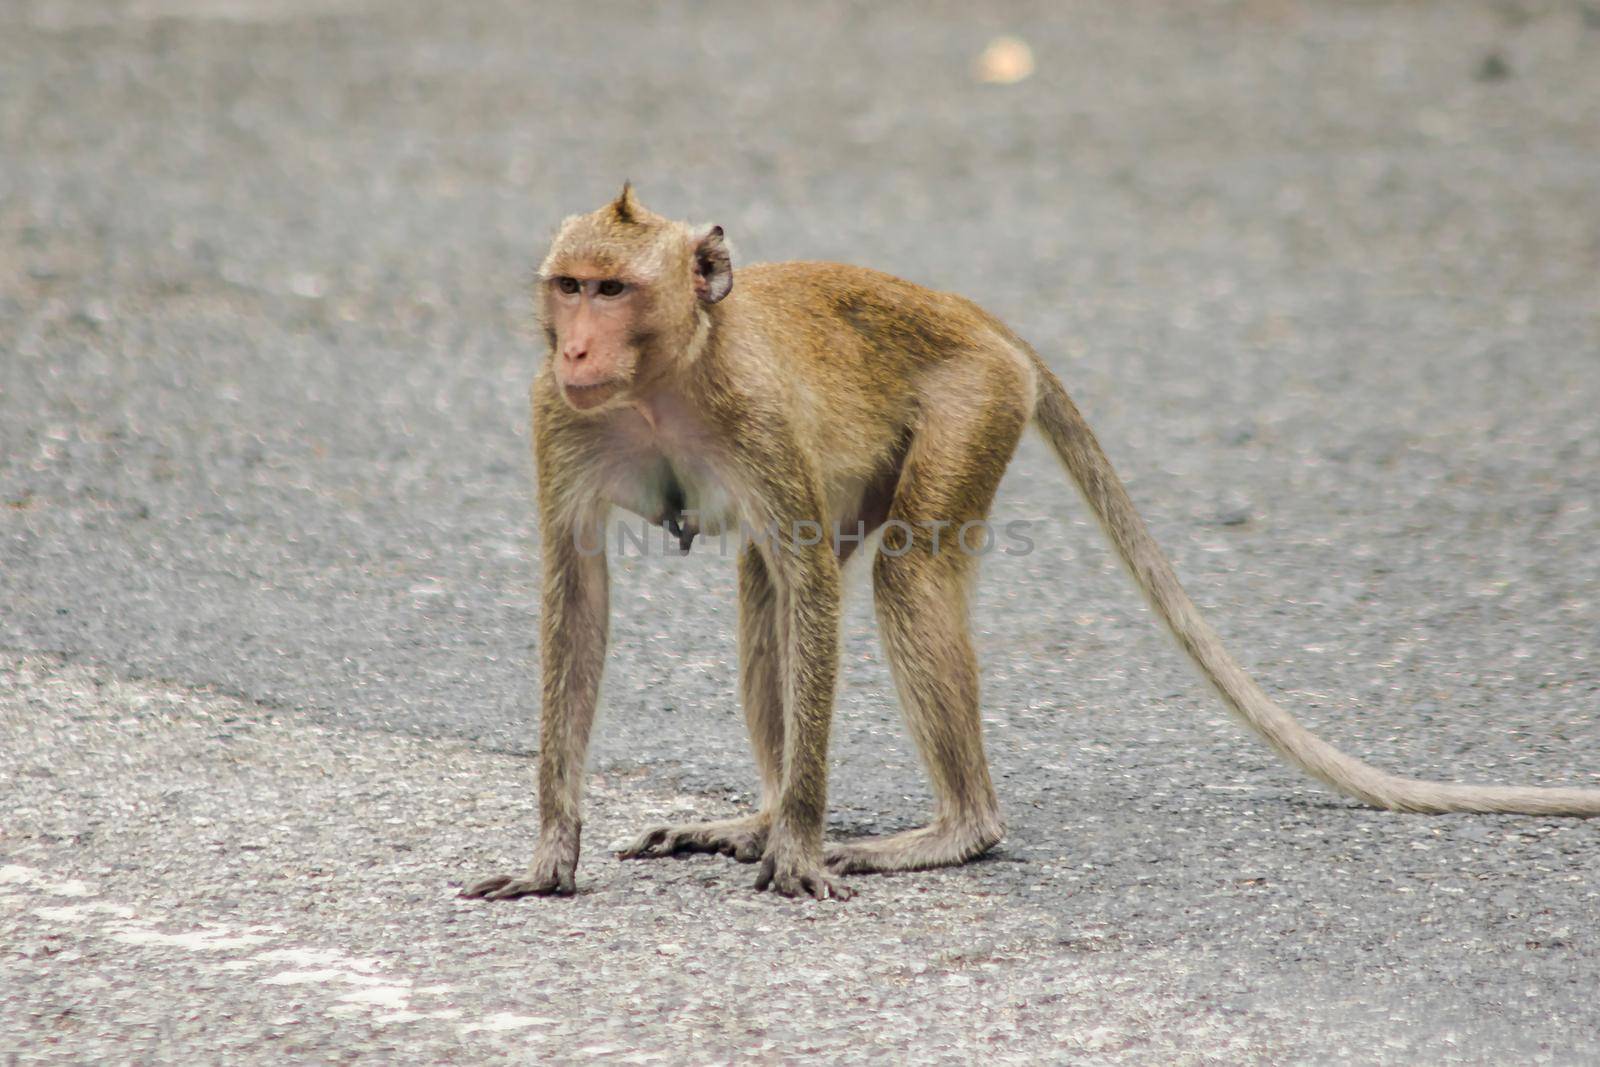 A female crab-eating macaque walking down the street.
The macaque has brown hair on its body. The tail is longer than the length of the body. The hair in the middle of the head is pointed upright.